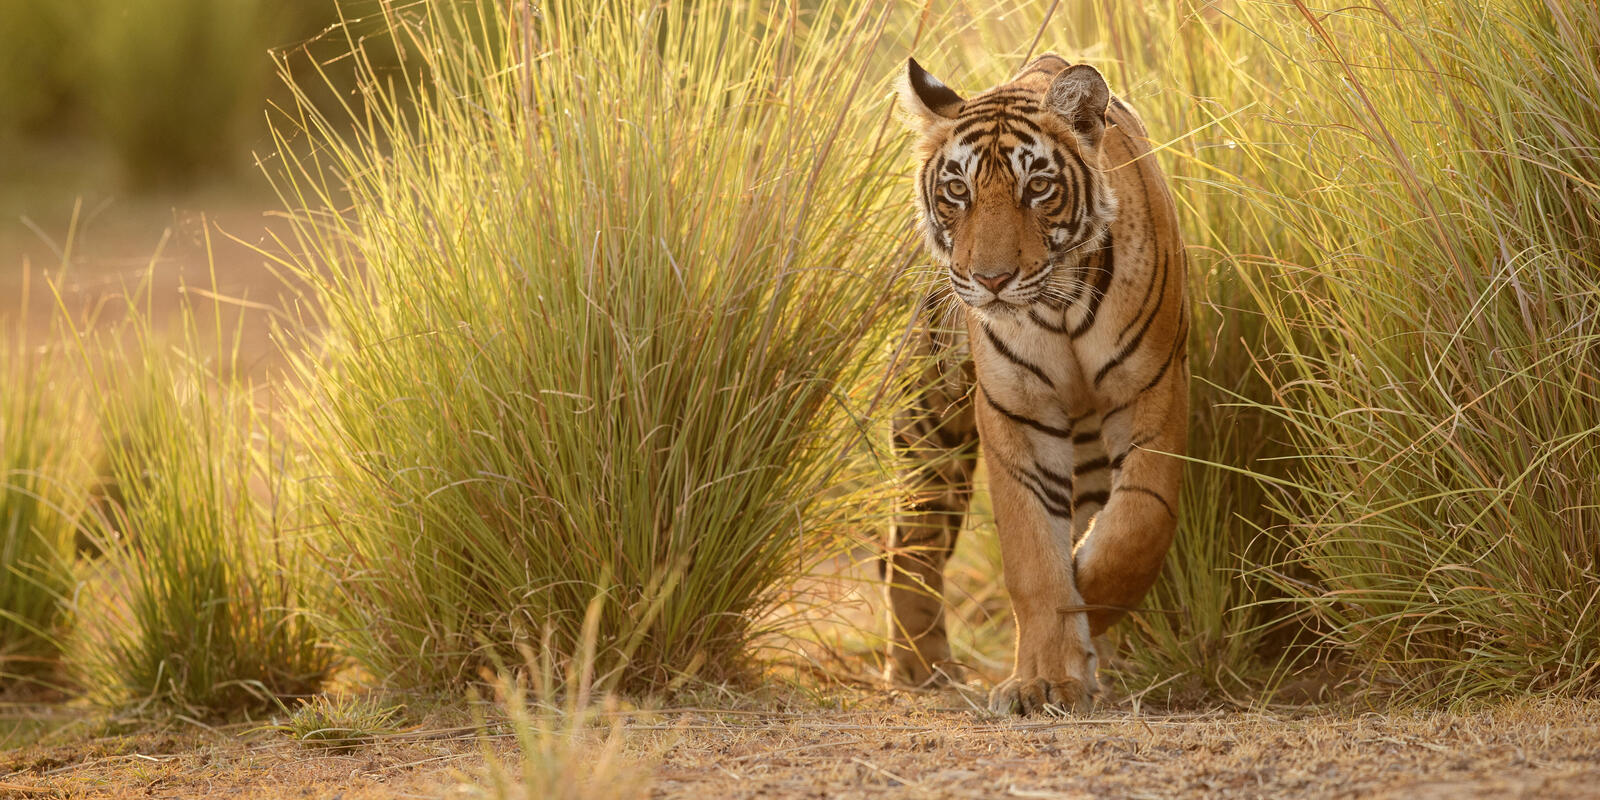 What does the world gain when we protect tigers? | Stories | WWF